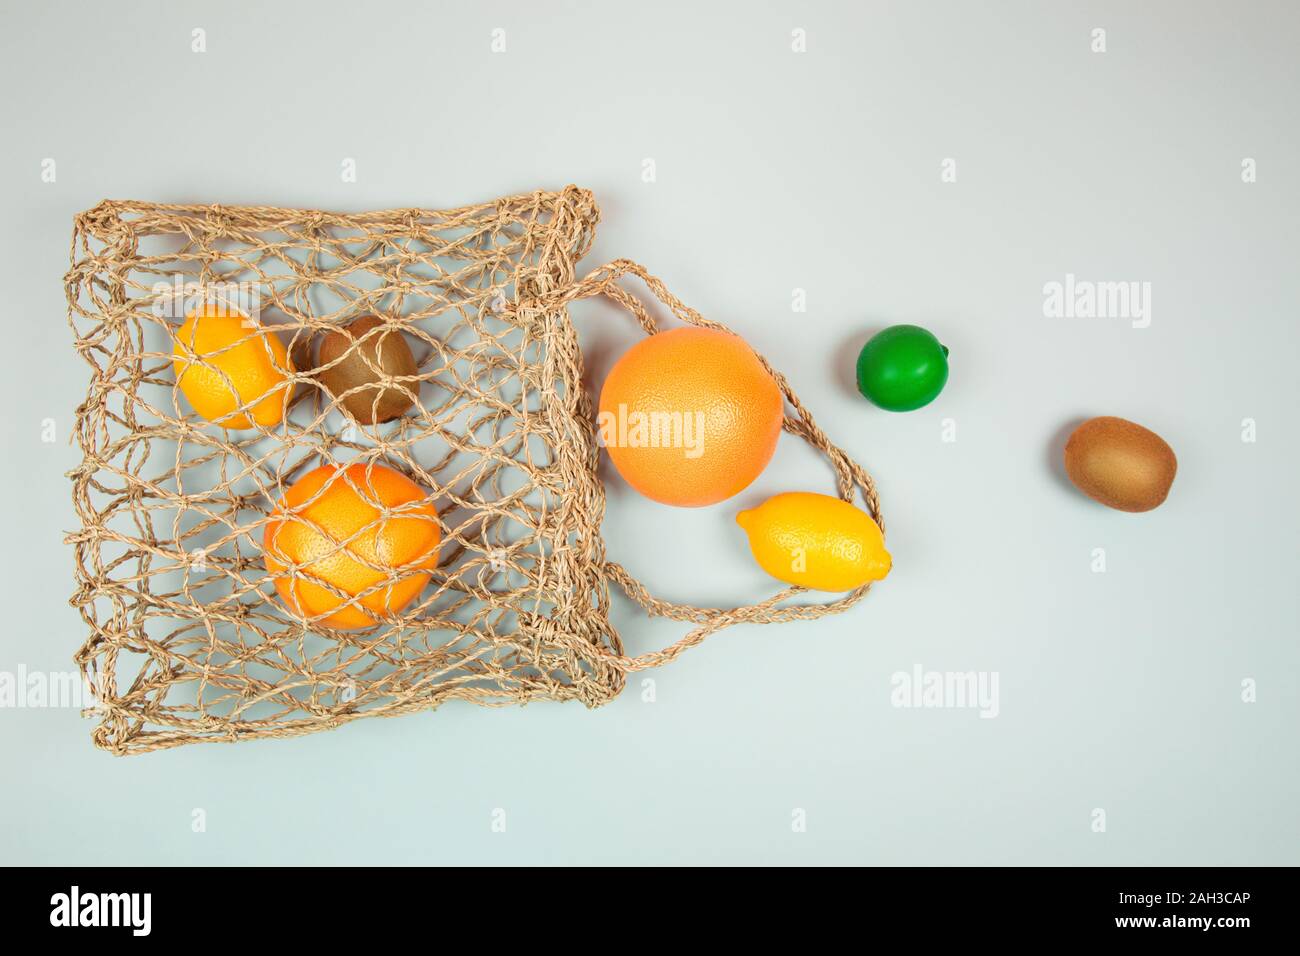 Fruits on textile bag. Trendy green background. Zero waste concept. Flat lay style. Stock Photo